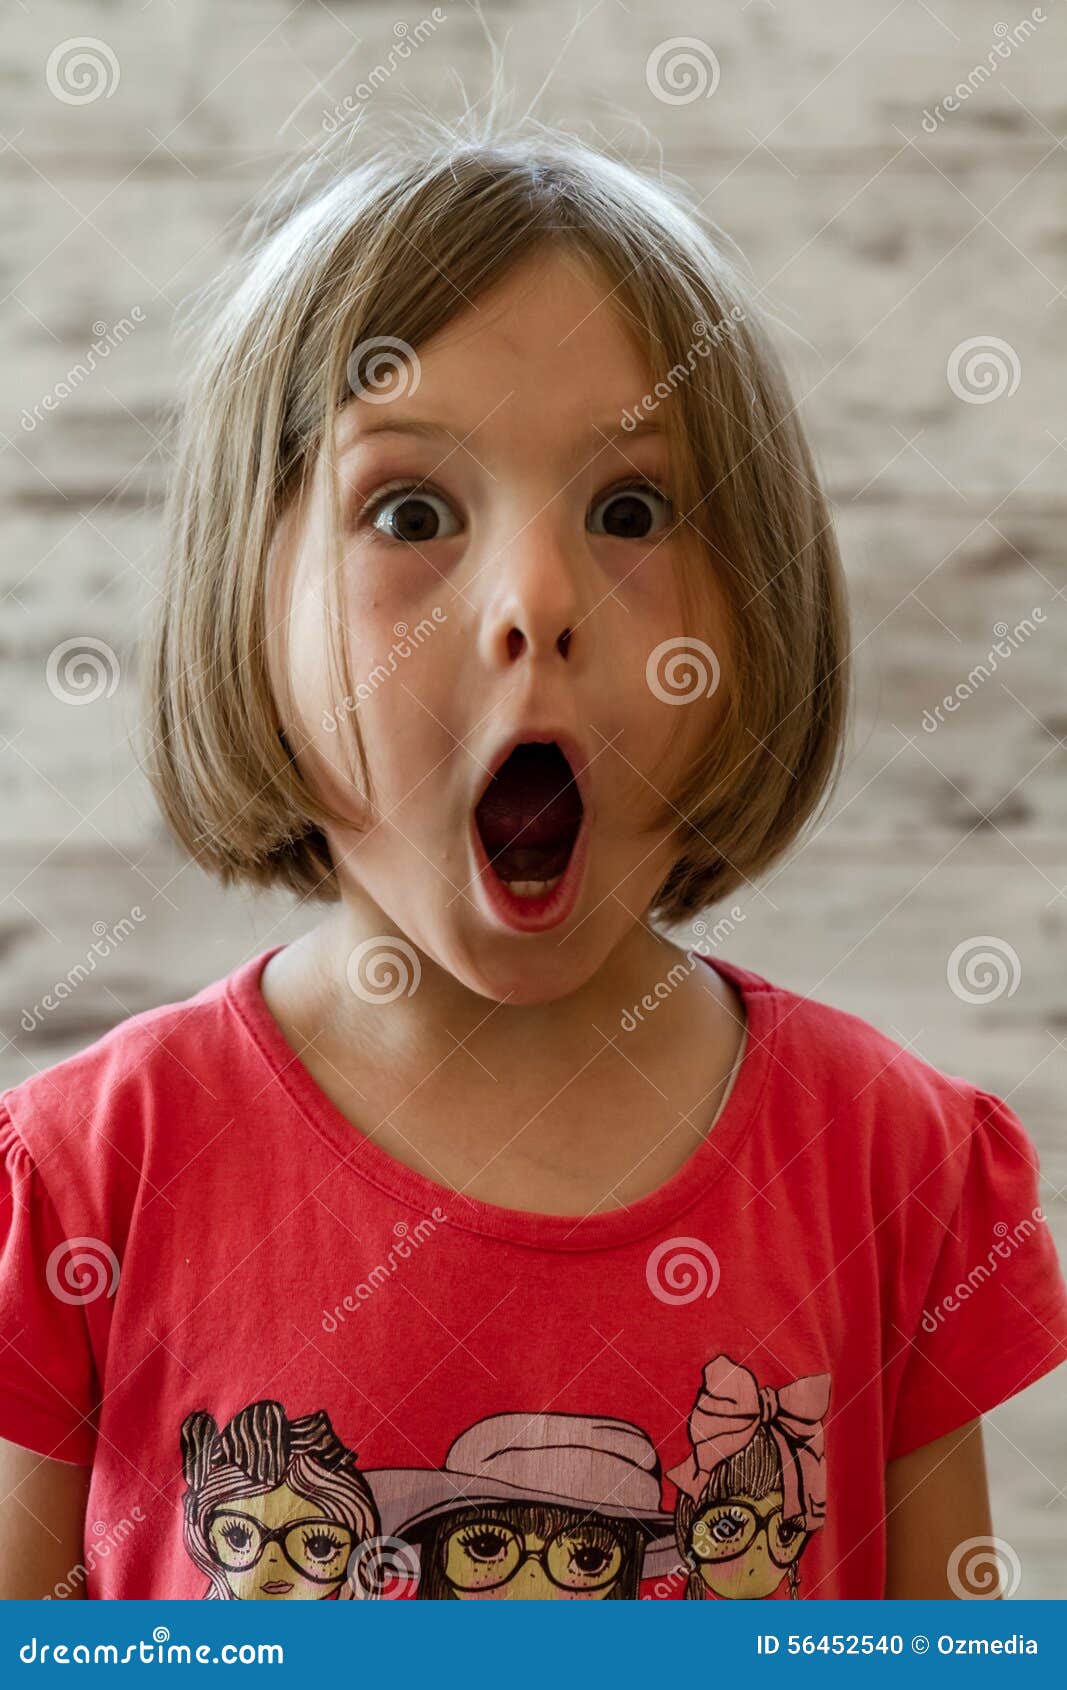 Funny Kid With Surprised Face Stock Photo | CartoonDealer.com #37980918